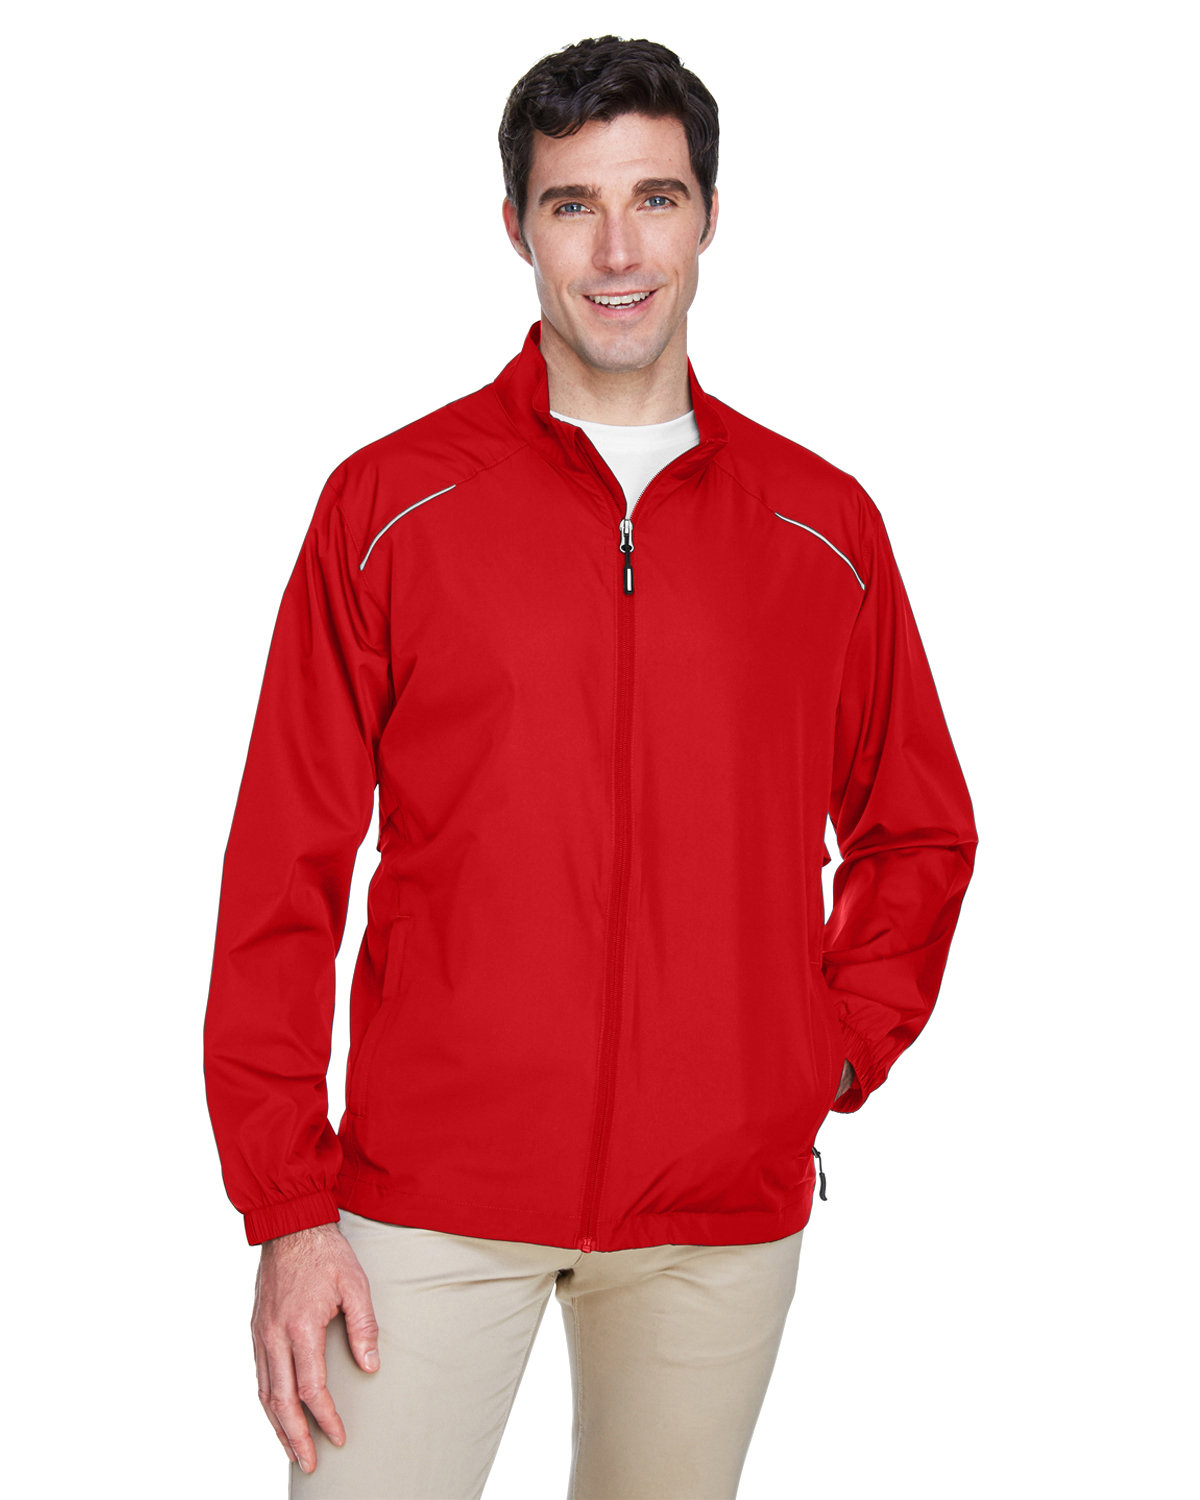 Core365 Men's Tall Techno Lite Motivate Unlined Lightweight Jacket CLASSIC RED 